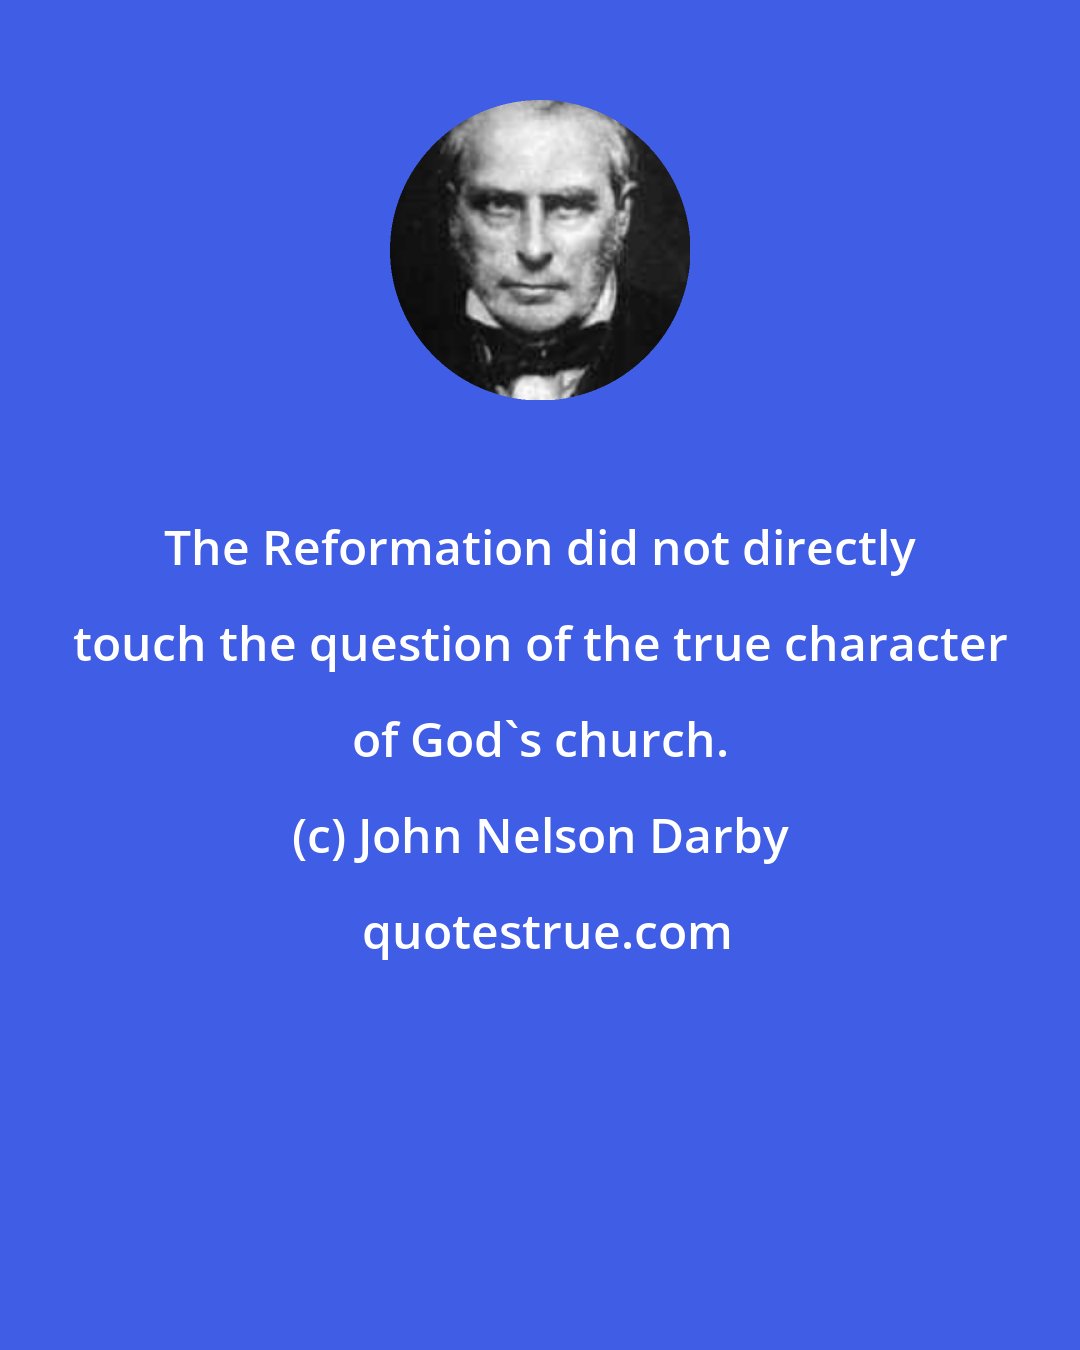 John Nelson Darby: The Reformation did not directly touch the question of the true character of God's church.